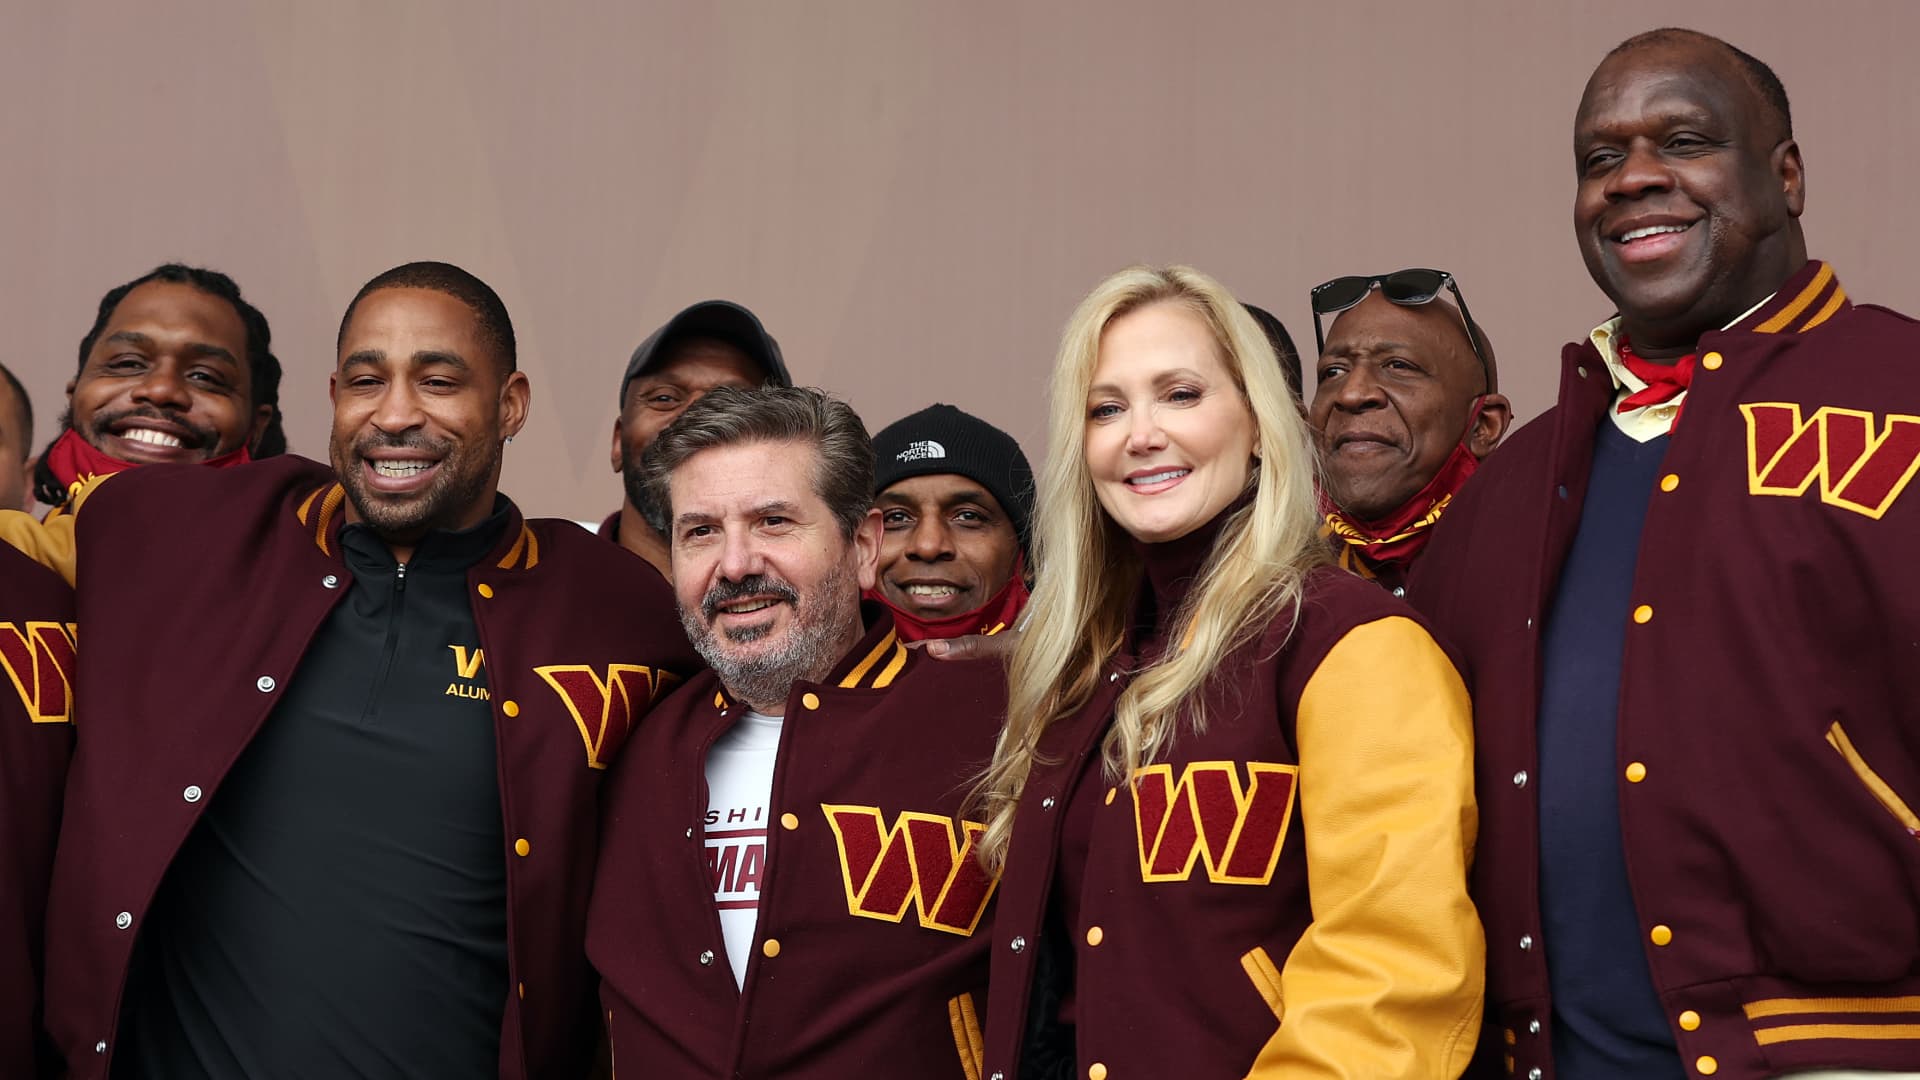 Team co-owners Dan and Tanya Snyder pose for a photo with current team members and alumni during the announcement of the Washington Football Team's name change to the Washington Commanders at FedExField on February 02, 2022 in Landover, Maryland.